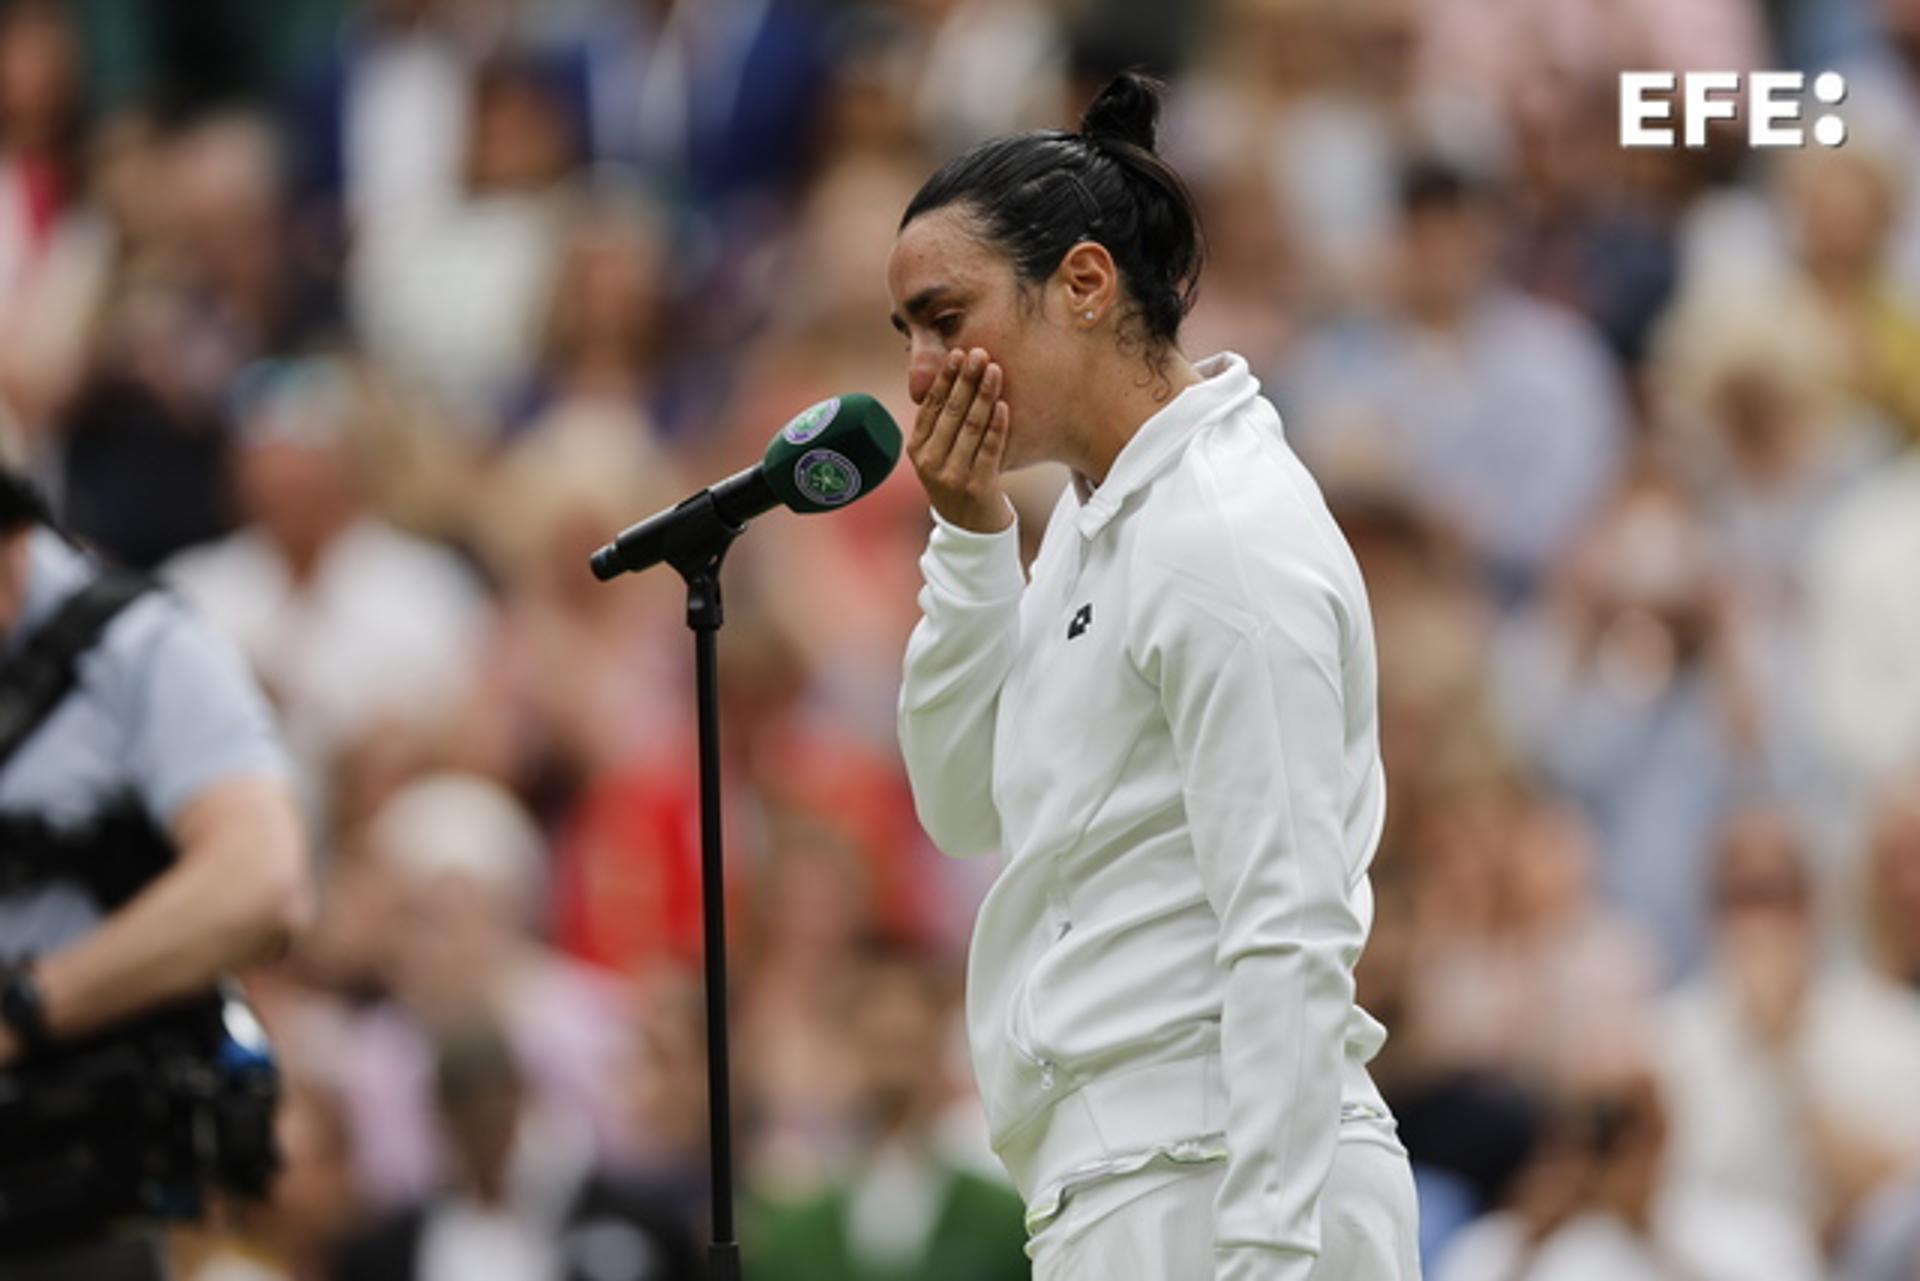 A tearful Ons Jabeur speaks after her defeat to Marketa Vondrousova in the ladies singles final at the Wimbledon Championships in London on 15 July 2023. EFE/EPA/TOLGA AKMEN EDITORIAL USE ONLY
